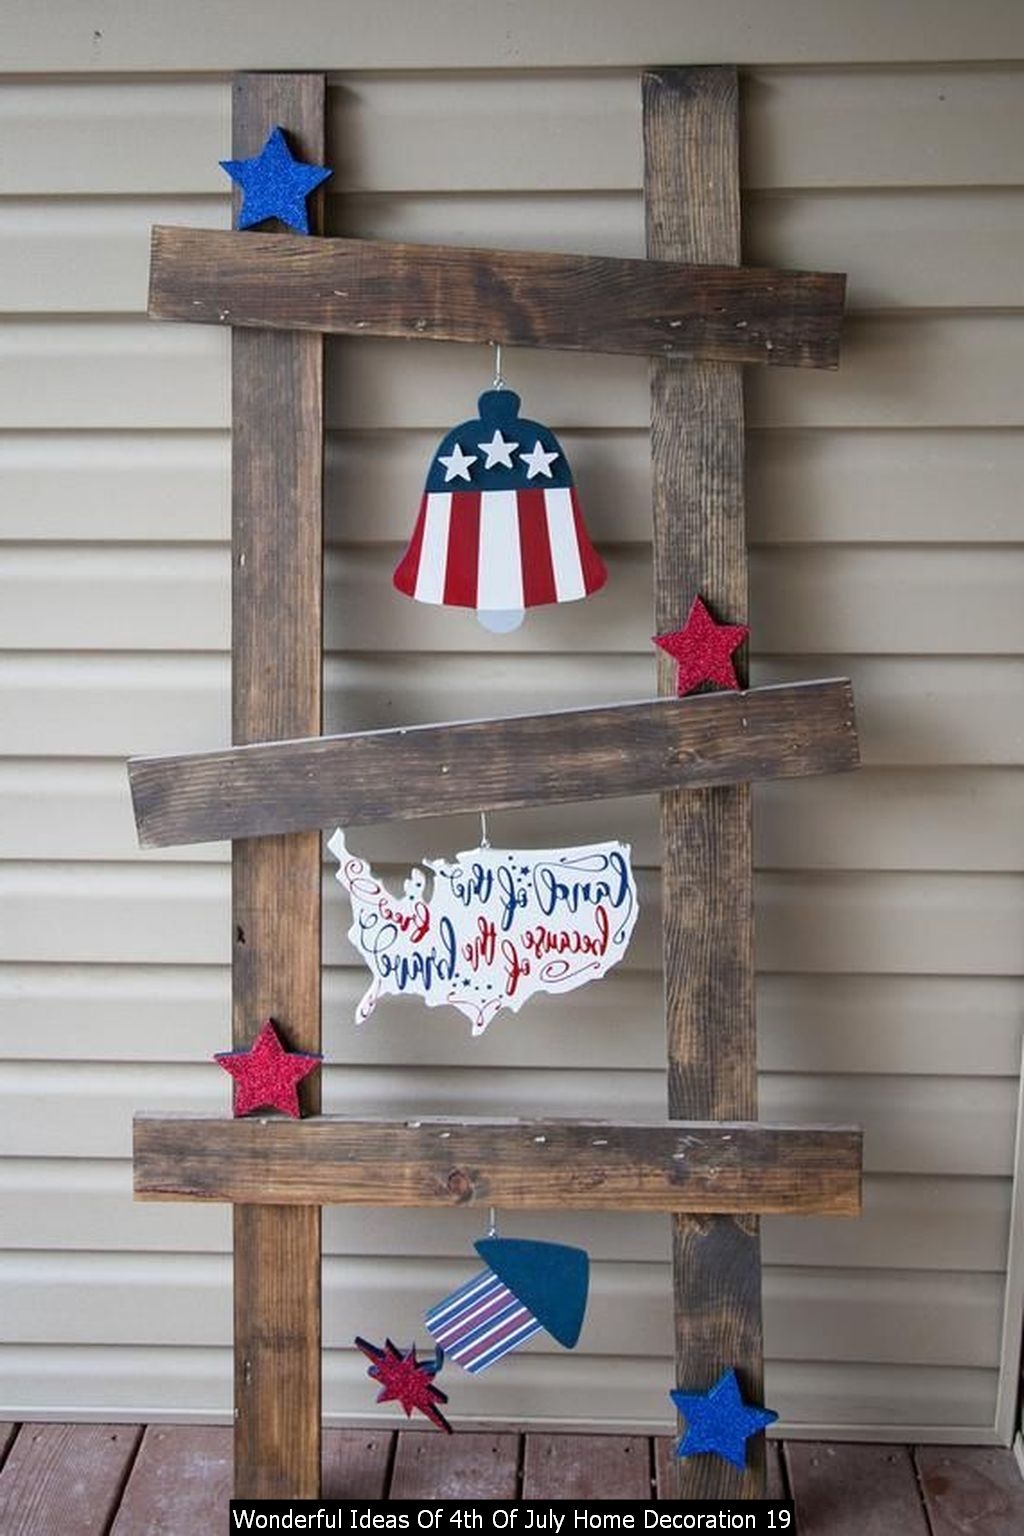 Wonderful Ideas Of 4th Of July Home Decoration 19